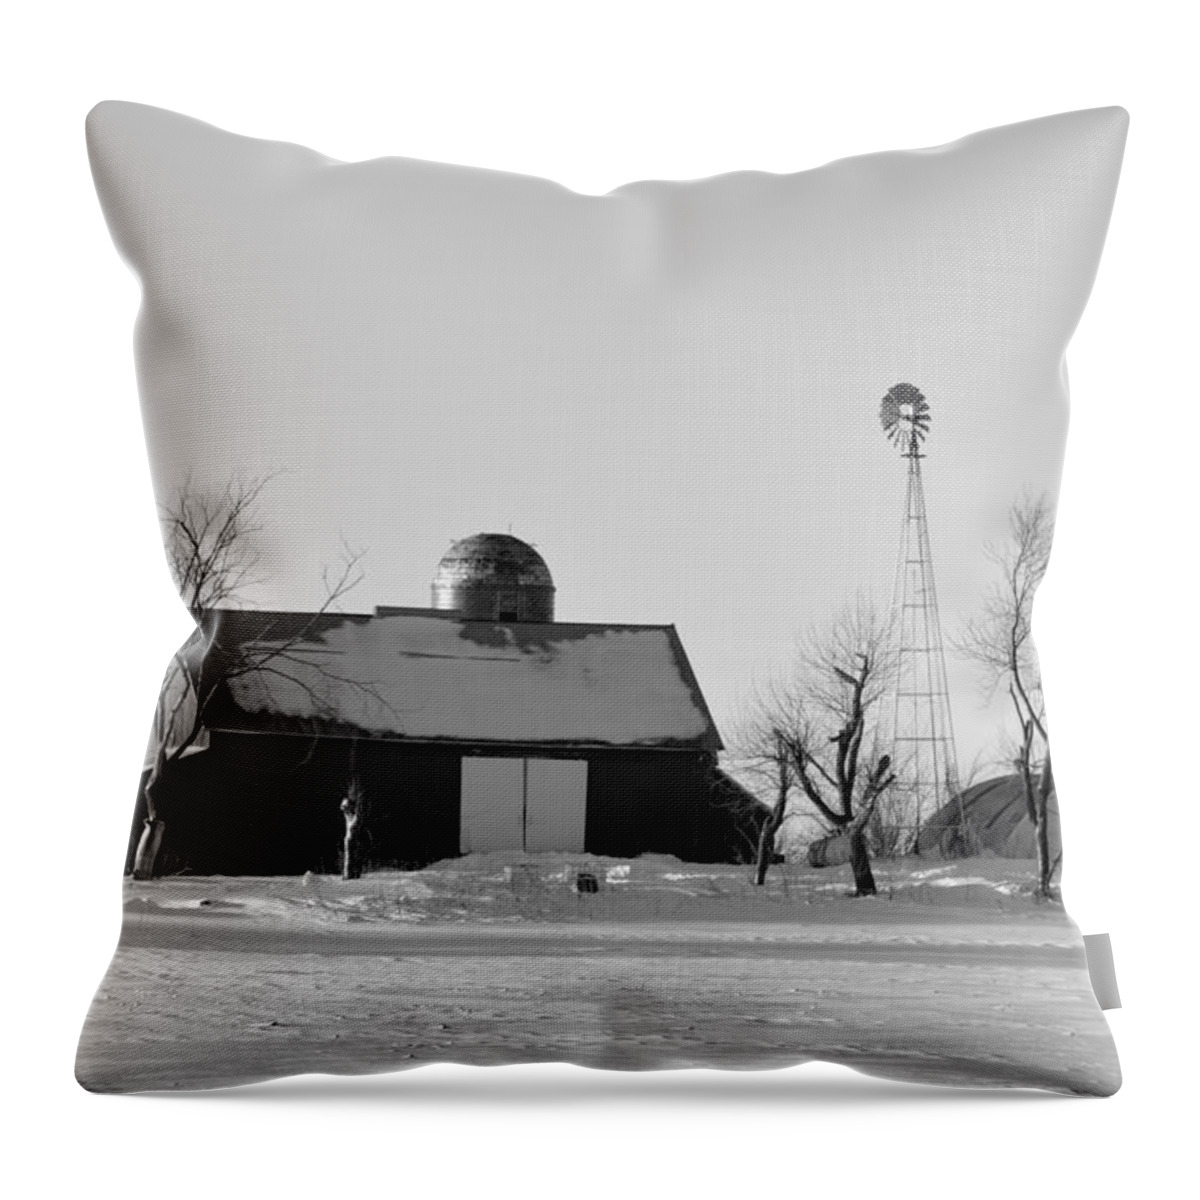 Black And White Throw Pillow featuring the photograph Black And White Winter by Bonfire Photography